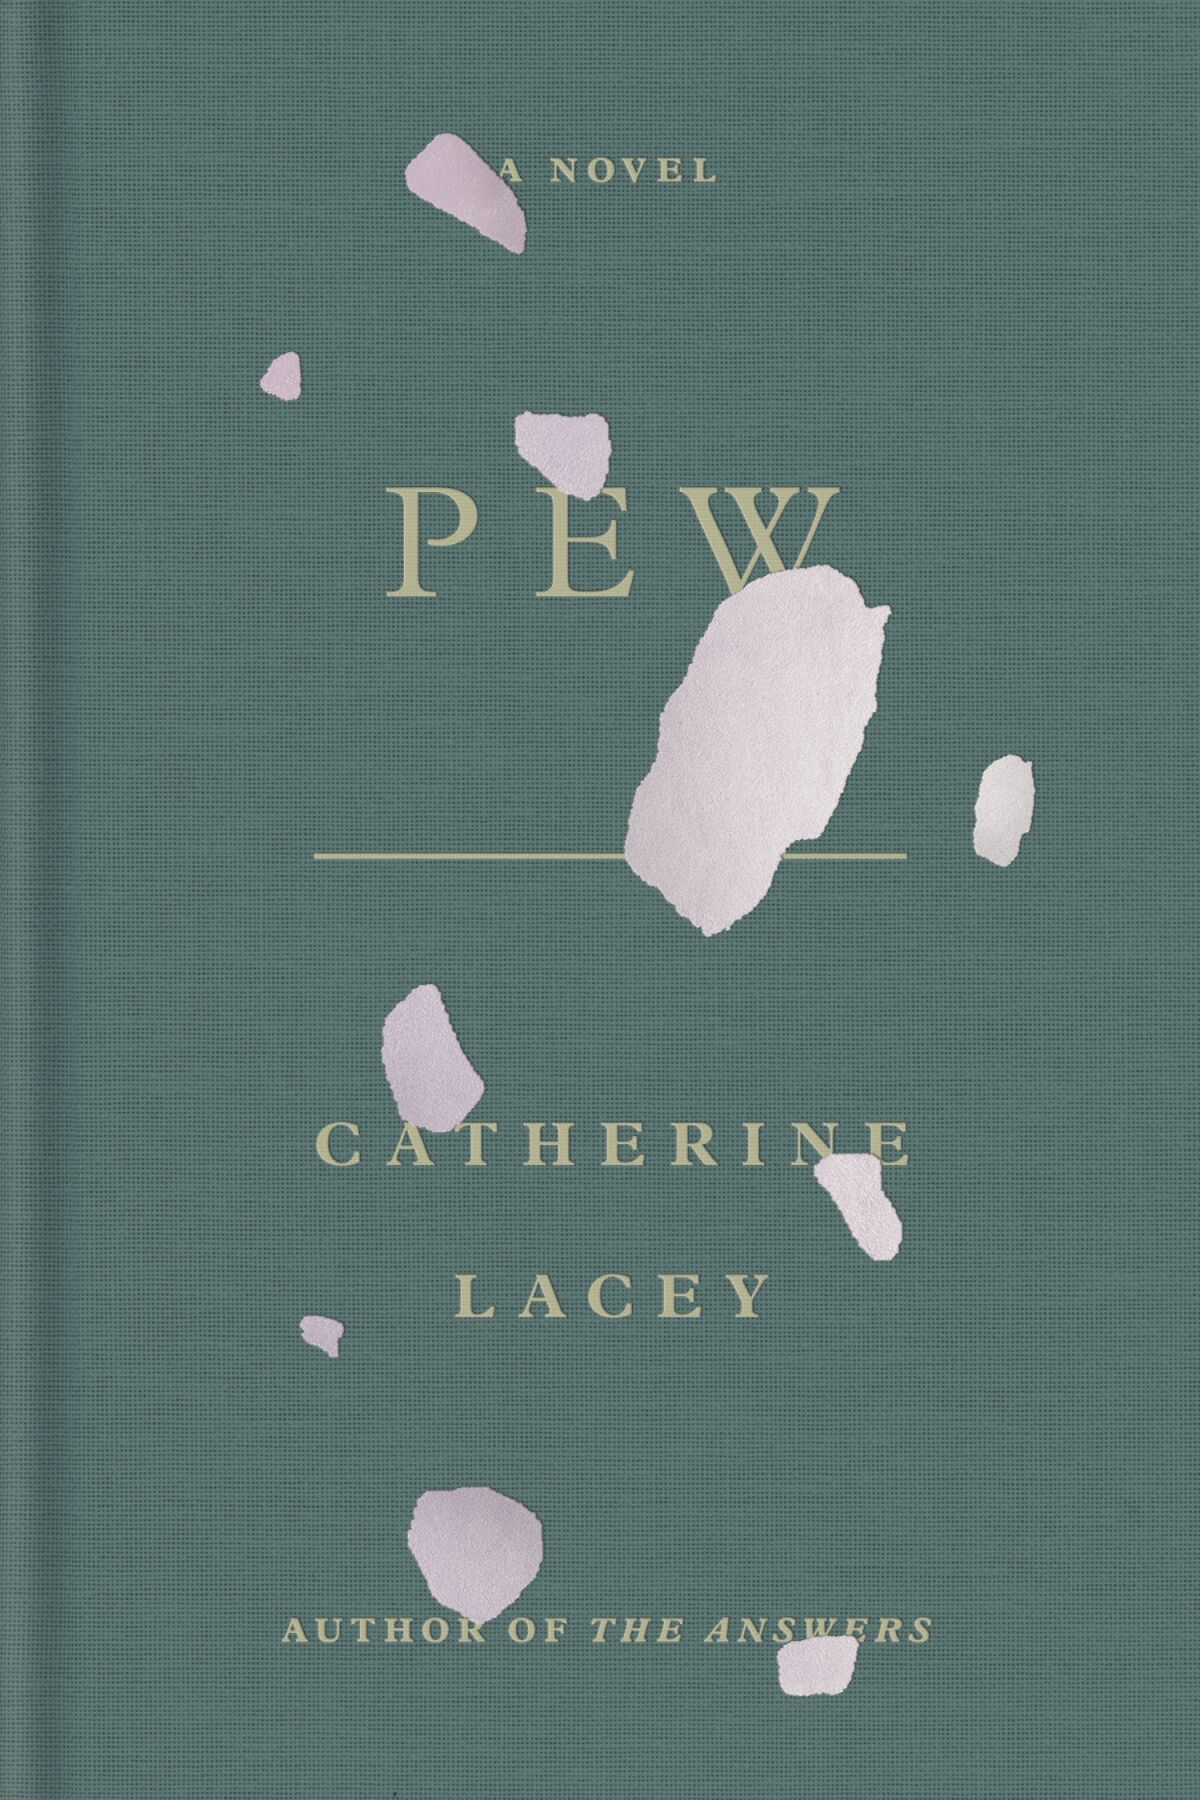 "Pew," by Catherine Lacey